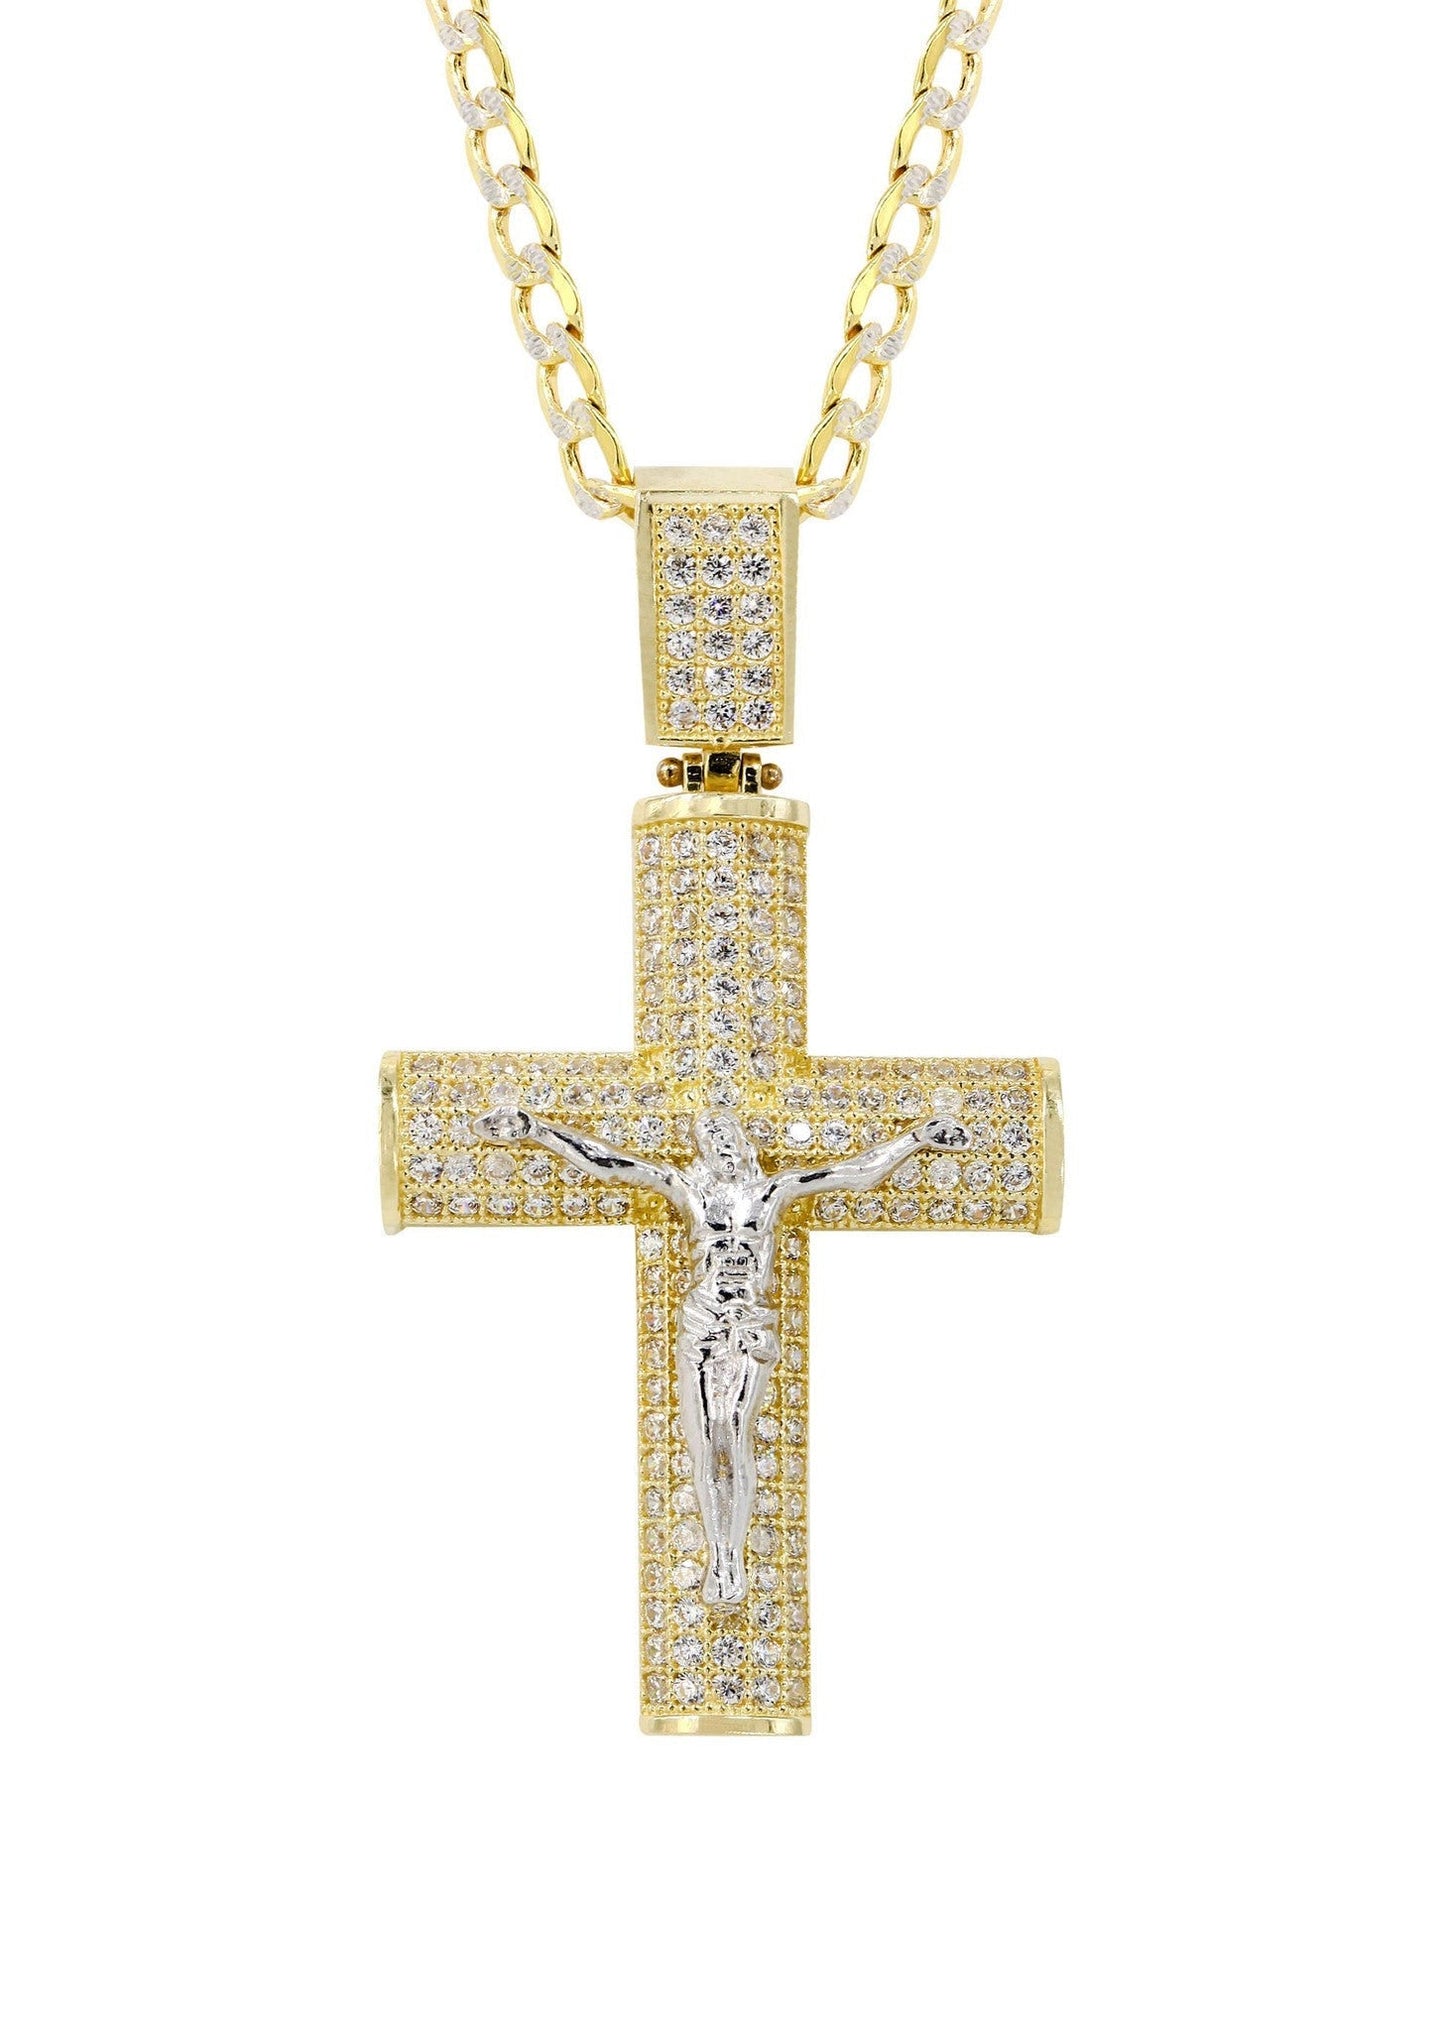 10K Yellow Gold Pave Cuban Chain & Cz Gold Cross Necklace